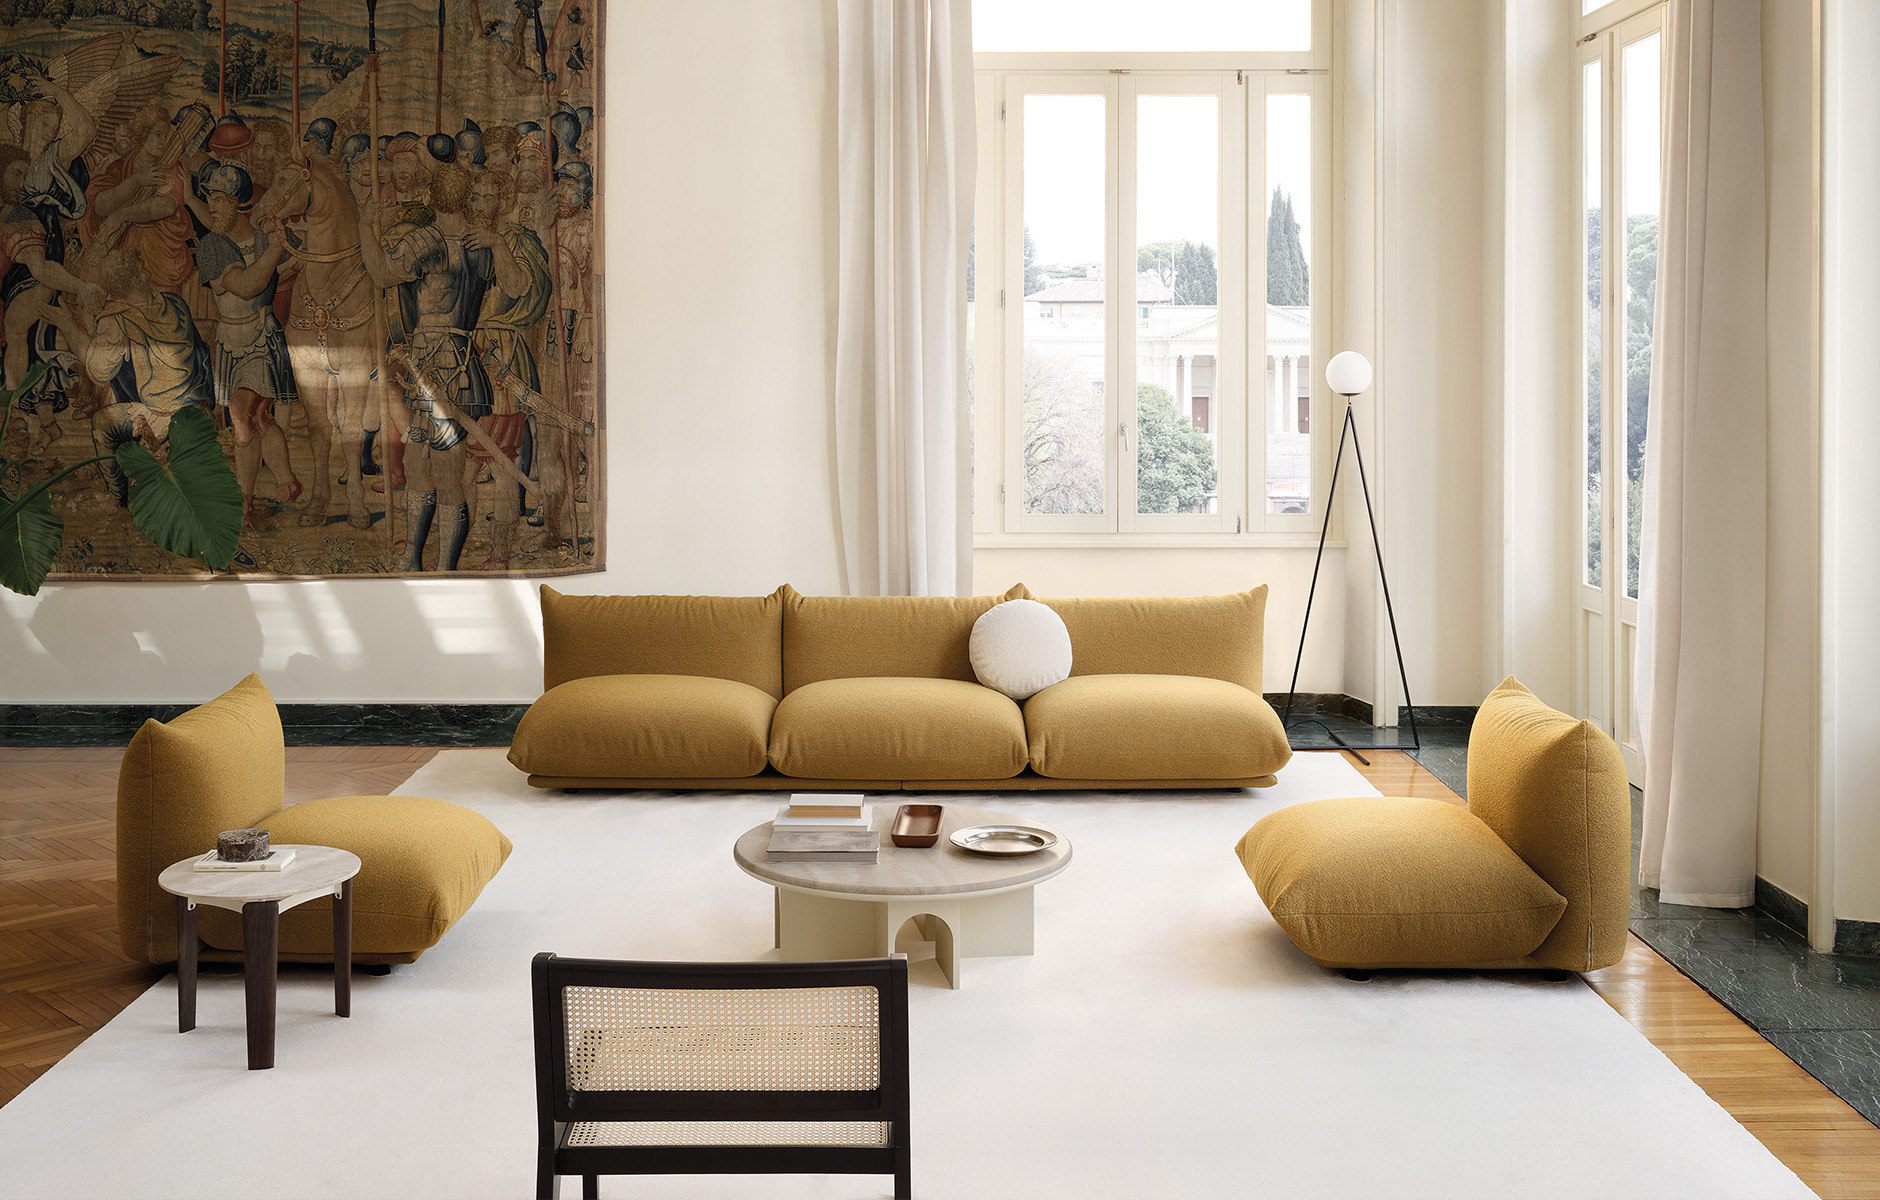 The Marenco sofa collection first designed by Mario Marenco for Arflex in 1972 has been added to, its new edition featuring the iconic pillowy form without arms. Photo c/o Arflex. 